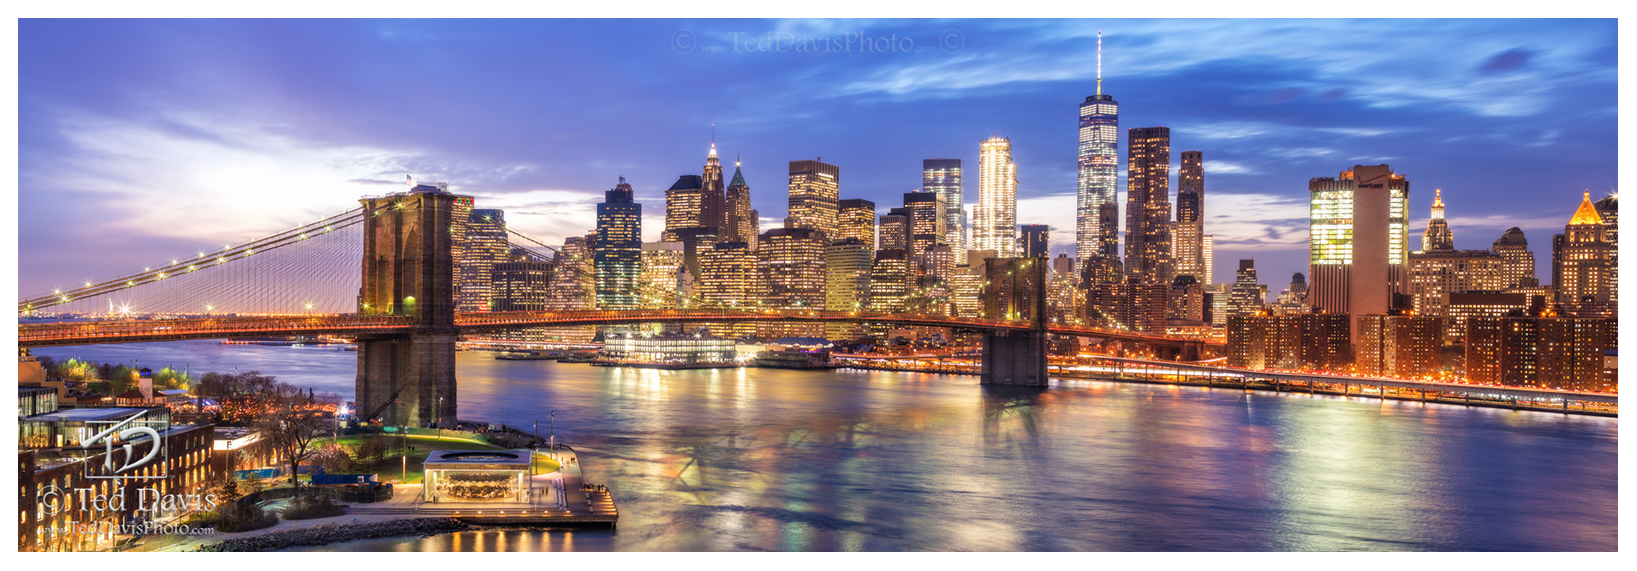 Limited Edition of 100 The New York City skyline is iconic in its majesty. It is recognized around the world as the Big Apple...